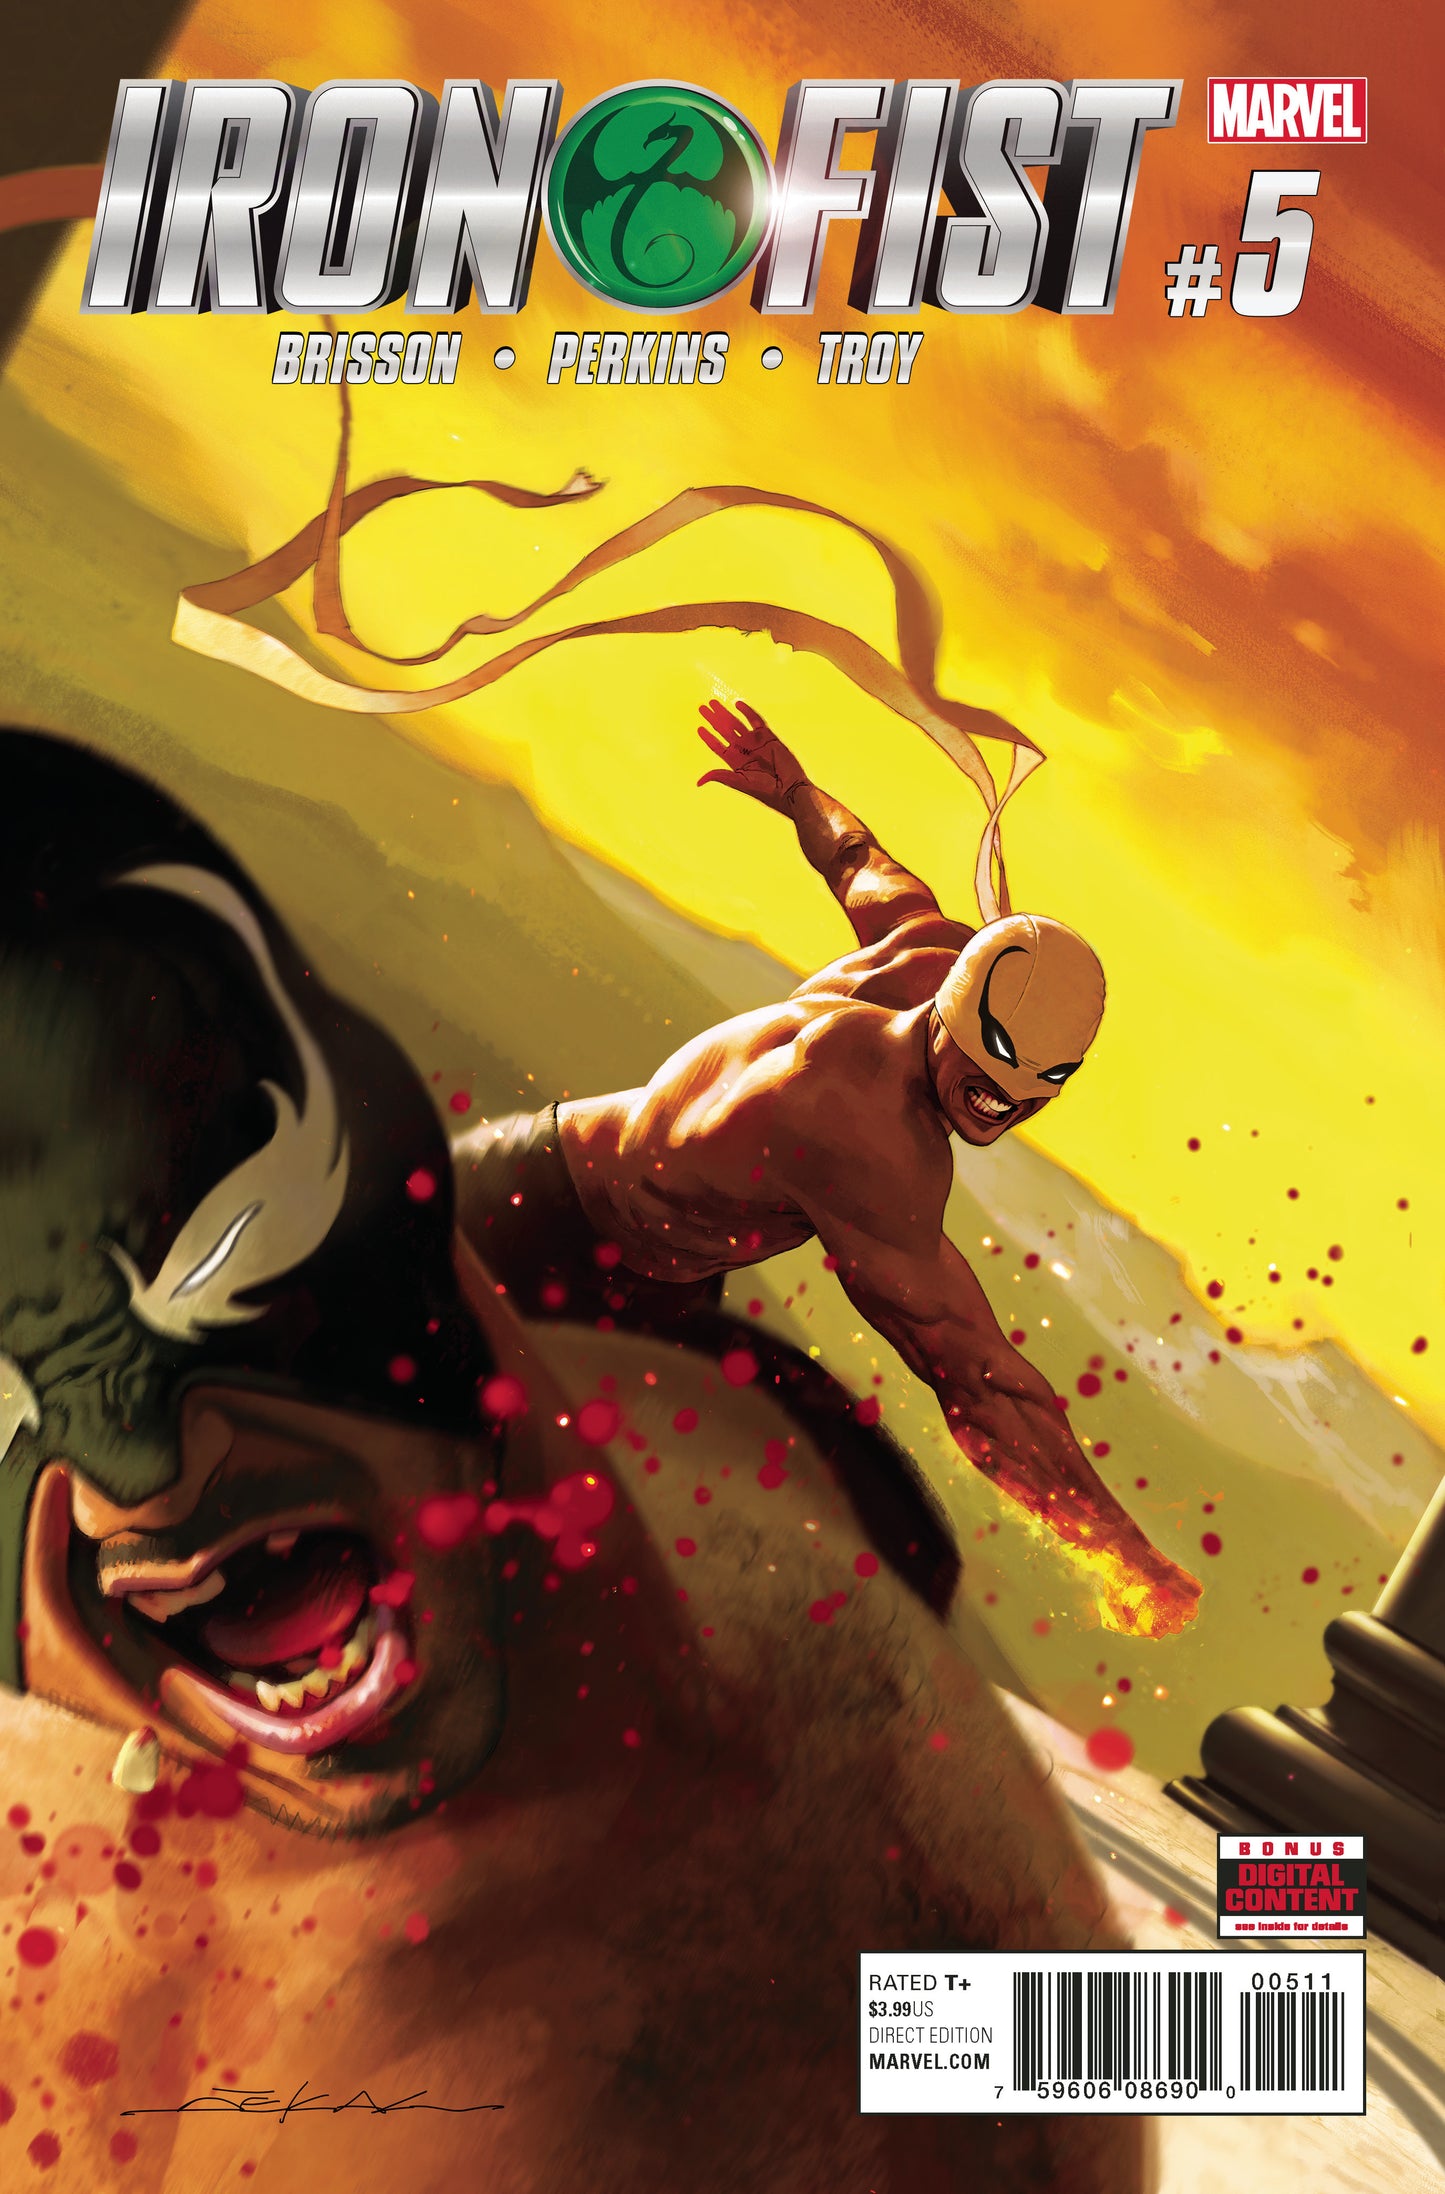 IRON FIST #5 COVER